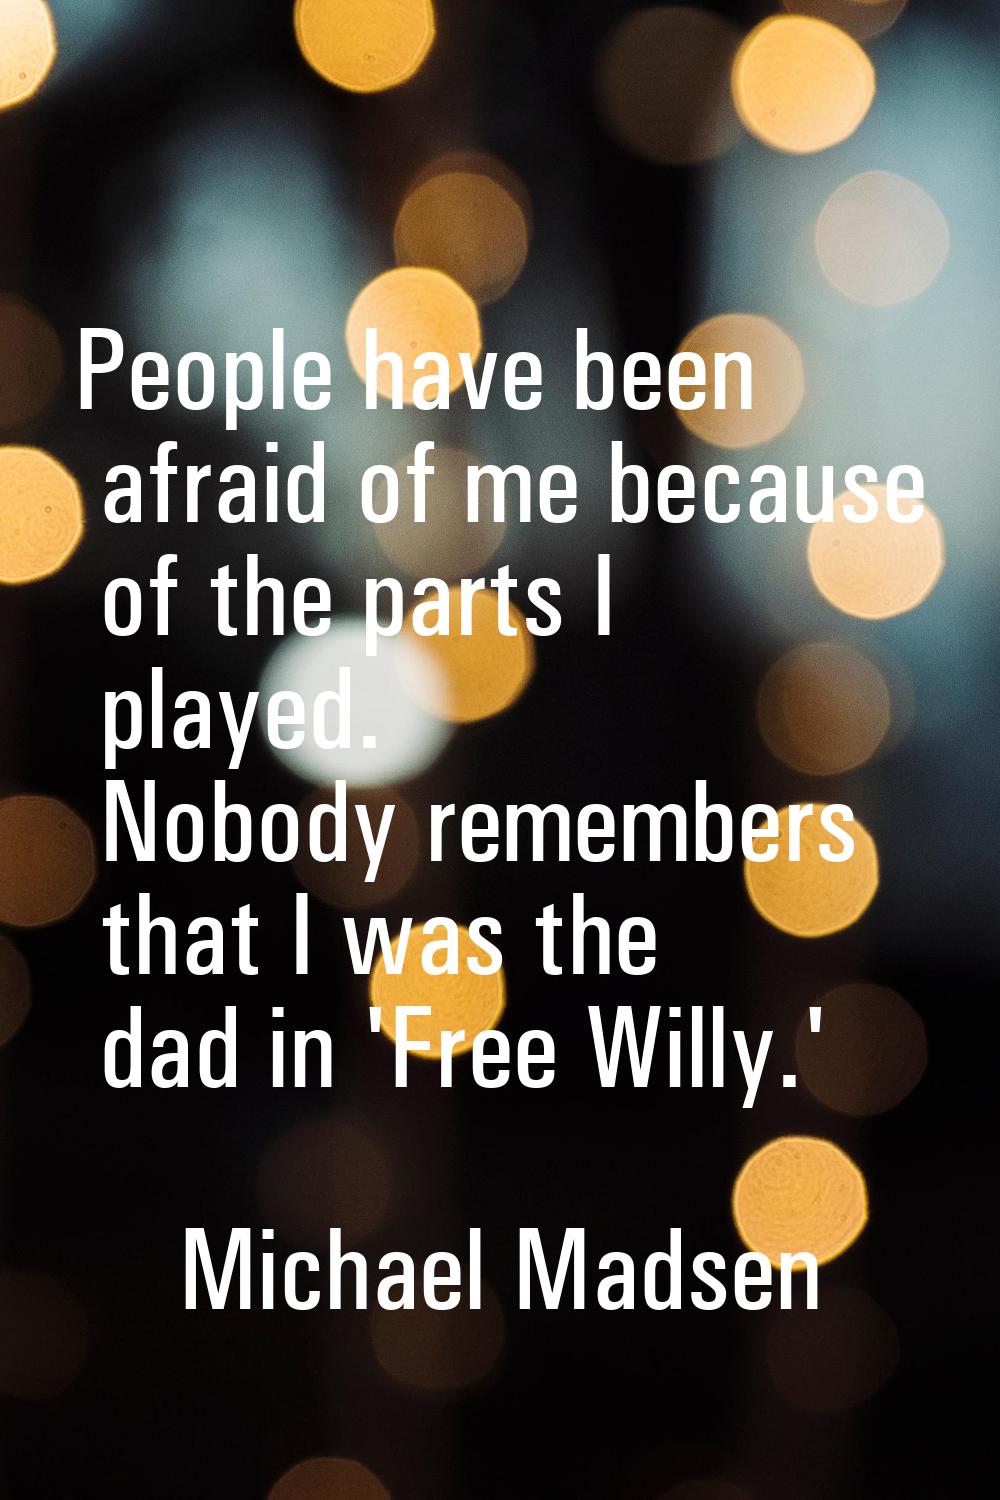 People have been afraid of me because of the parts I played. Nobody remembers that I was the dad in